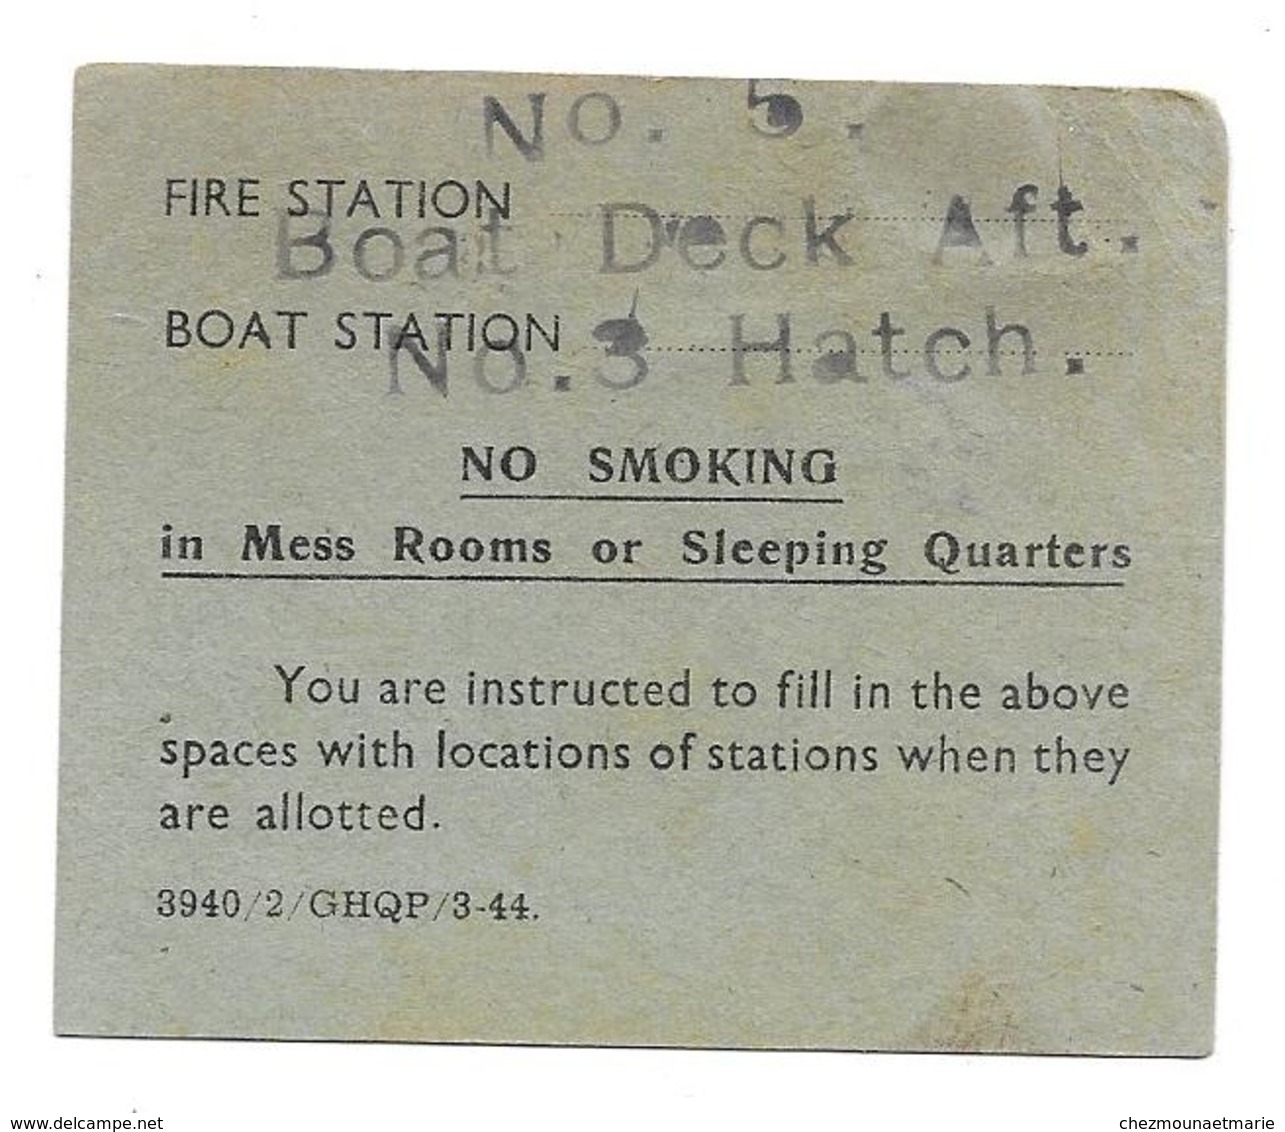 BERTHING CARD - N°5 BOAT DECK AFT N°3 HATCH - FIRE STATION BOAT SATATION - MILITAIRE - Schiffe